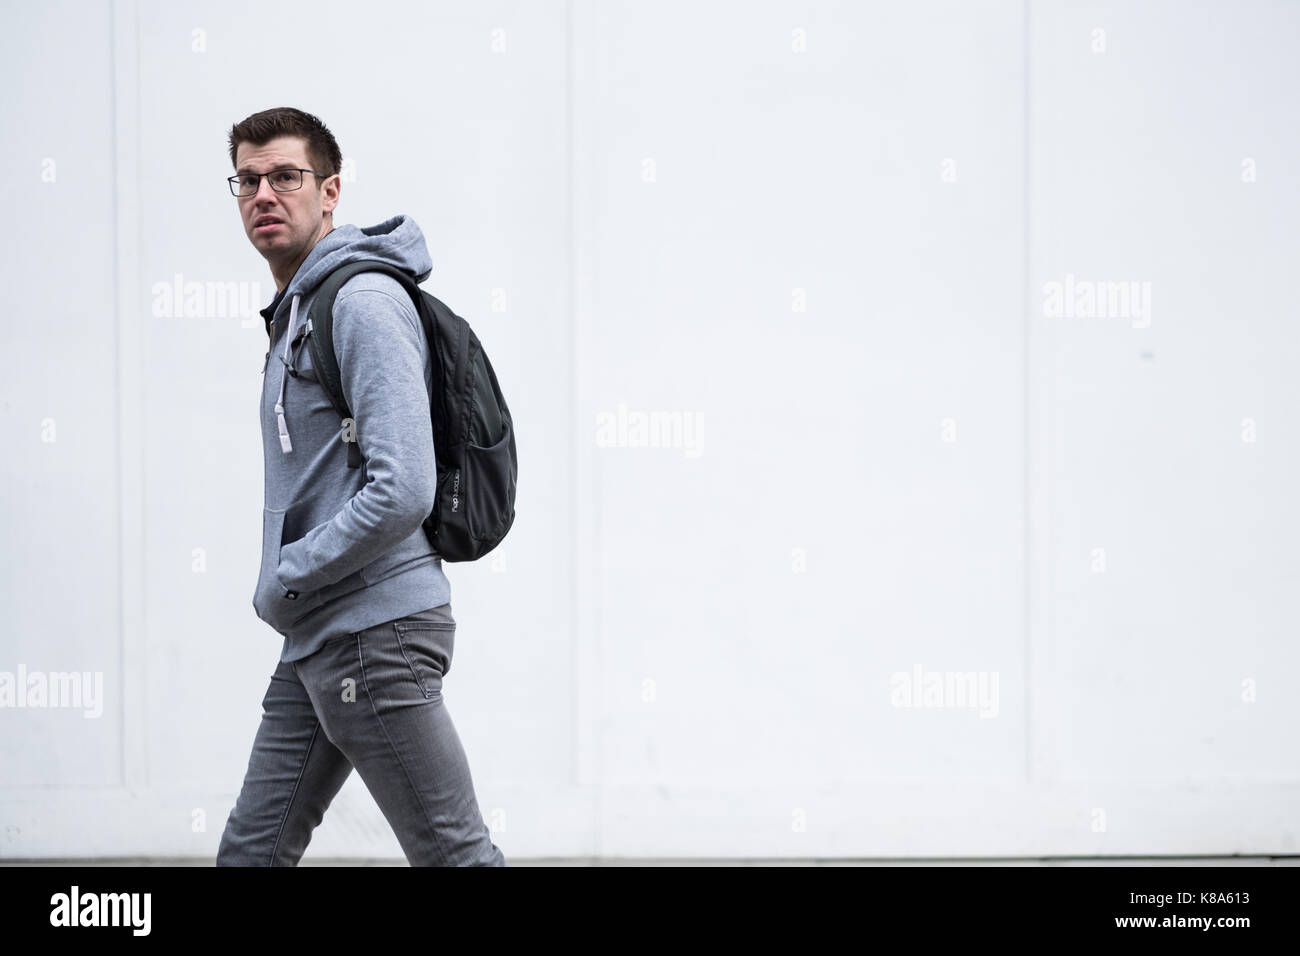 White male with back pack on London's Oxford Street Stock Photo